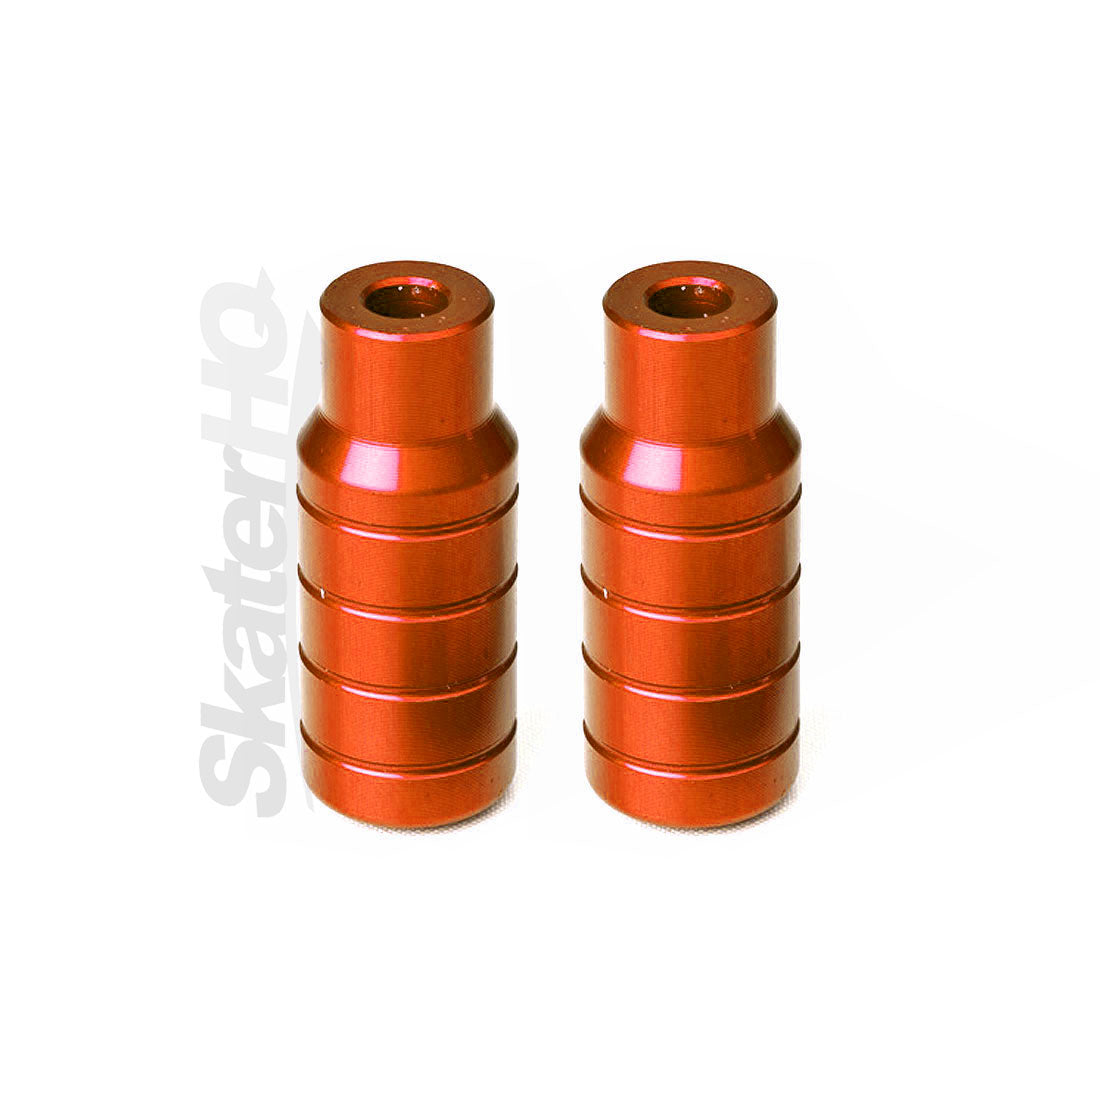 Apex Pro Grind Pegs Orange - Pack of 2 Scooter Hardware and Parts